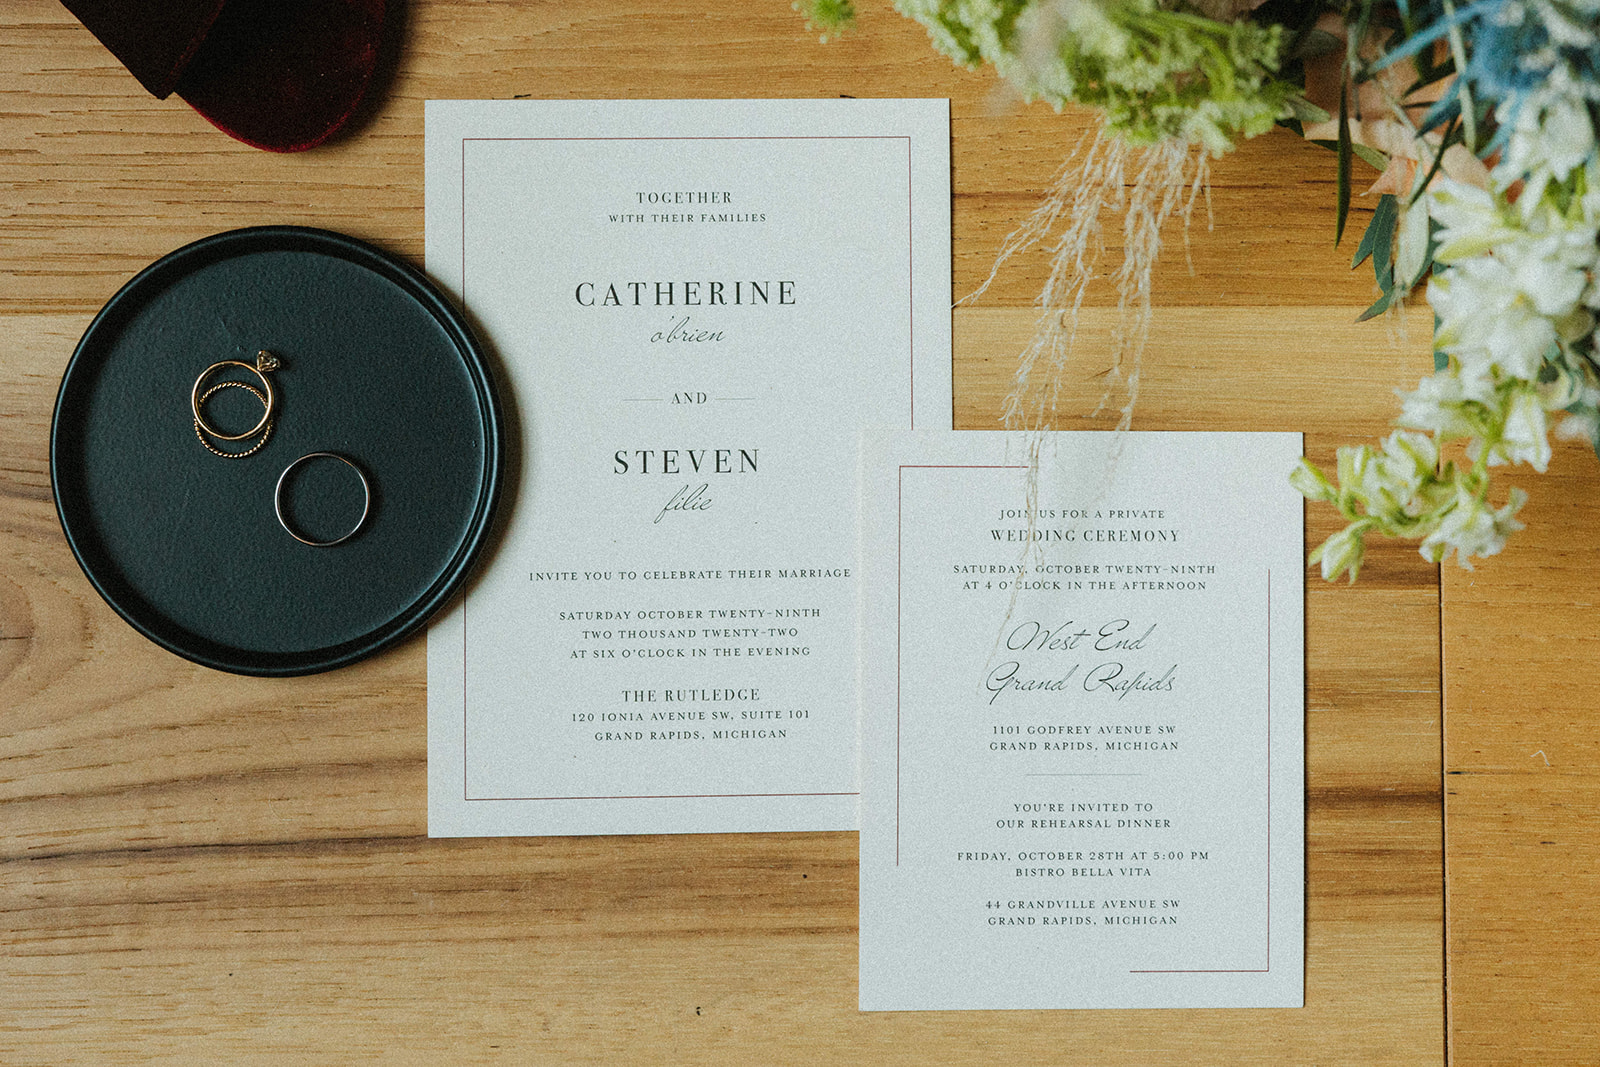 Downtown Grand Rapids Wedding invitations in a layflat photograph.